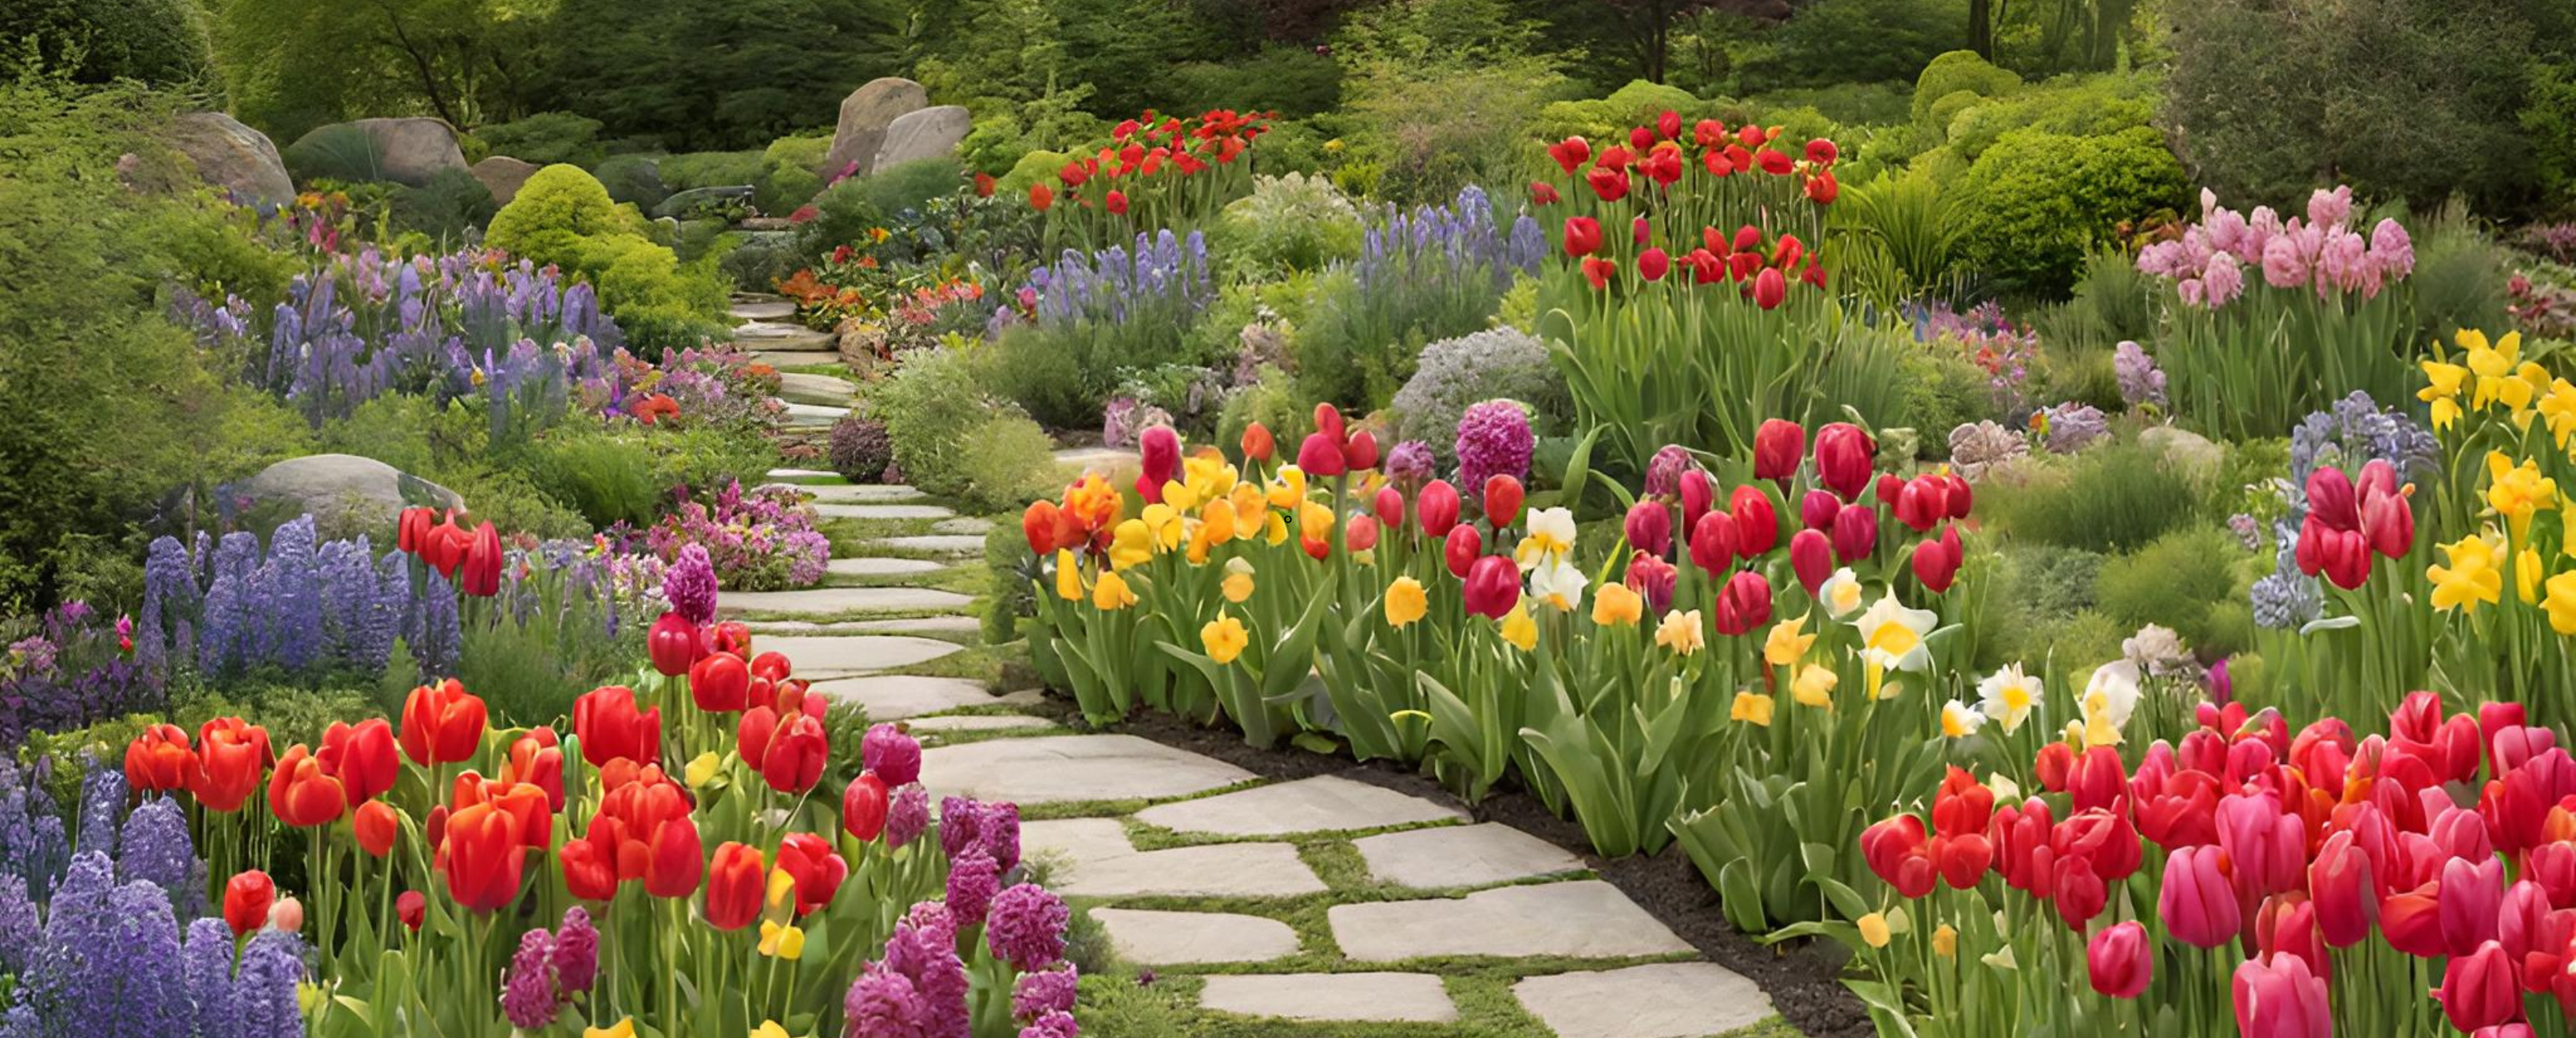 A lush, vibrant garden at the peak of spring bloom. The foreground features a variety of colorful spring flowers—tulips, daffodils, and hyacinths—creating a tapestry of reds, yellows, purples, and pinks. In the middle ground, a newly constructed stone pathway winds gently through the garden, inviting exploration. The path leads to a serene terrace area in the background, where comfortable outdoor seating is nestled under a pergola draped with flowering vines. The entire scene is framed by fresh green foliage and a few strategically placed deciduous trees, their branches just beginning to bud, symbolizing renewal and growth. The early morning light filters softly through the leaves, casting a warm, welcoming glow over the garden. A few butterflies and bees can be seen pollinating the flowers, adding a dynamic element of biodiversity to the scene.